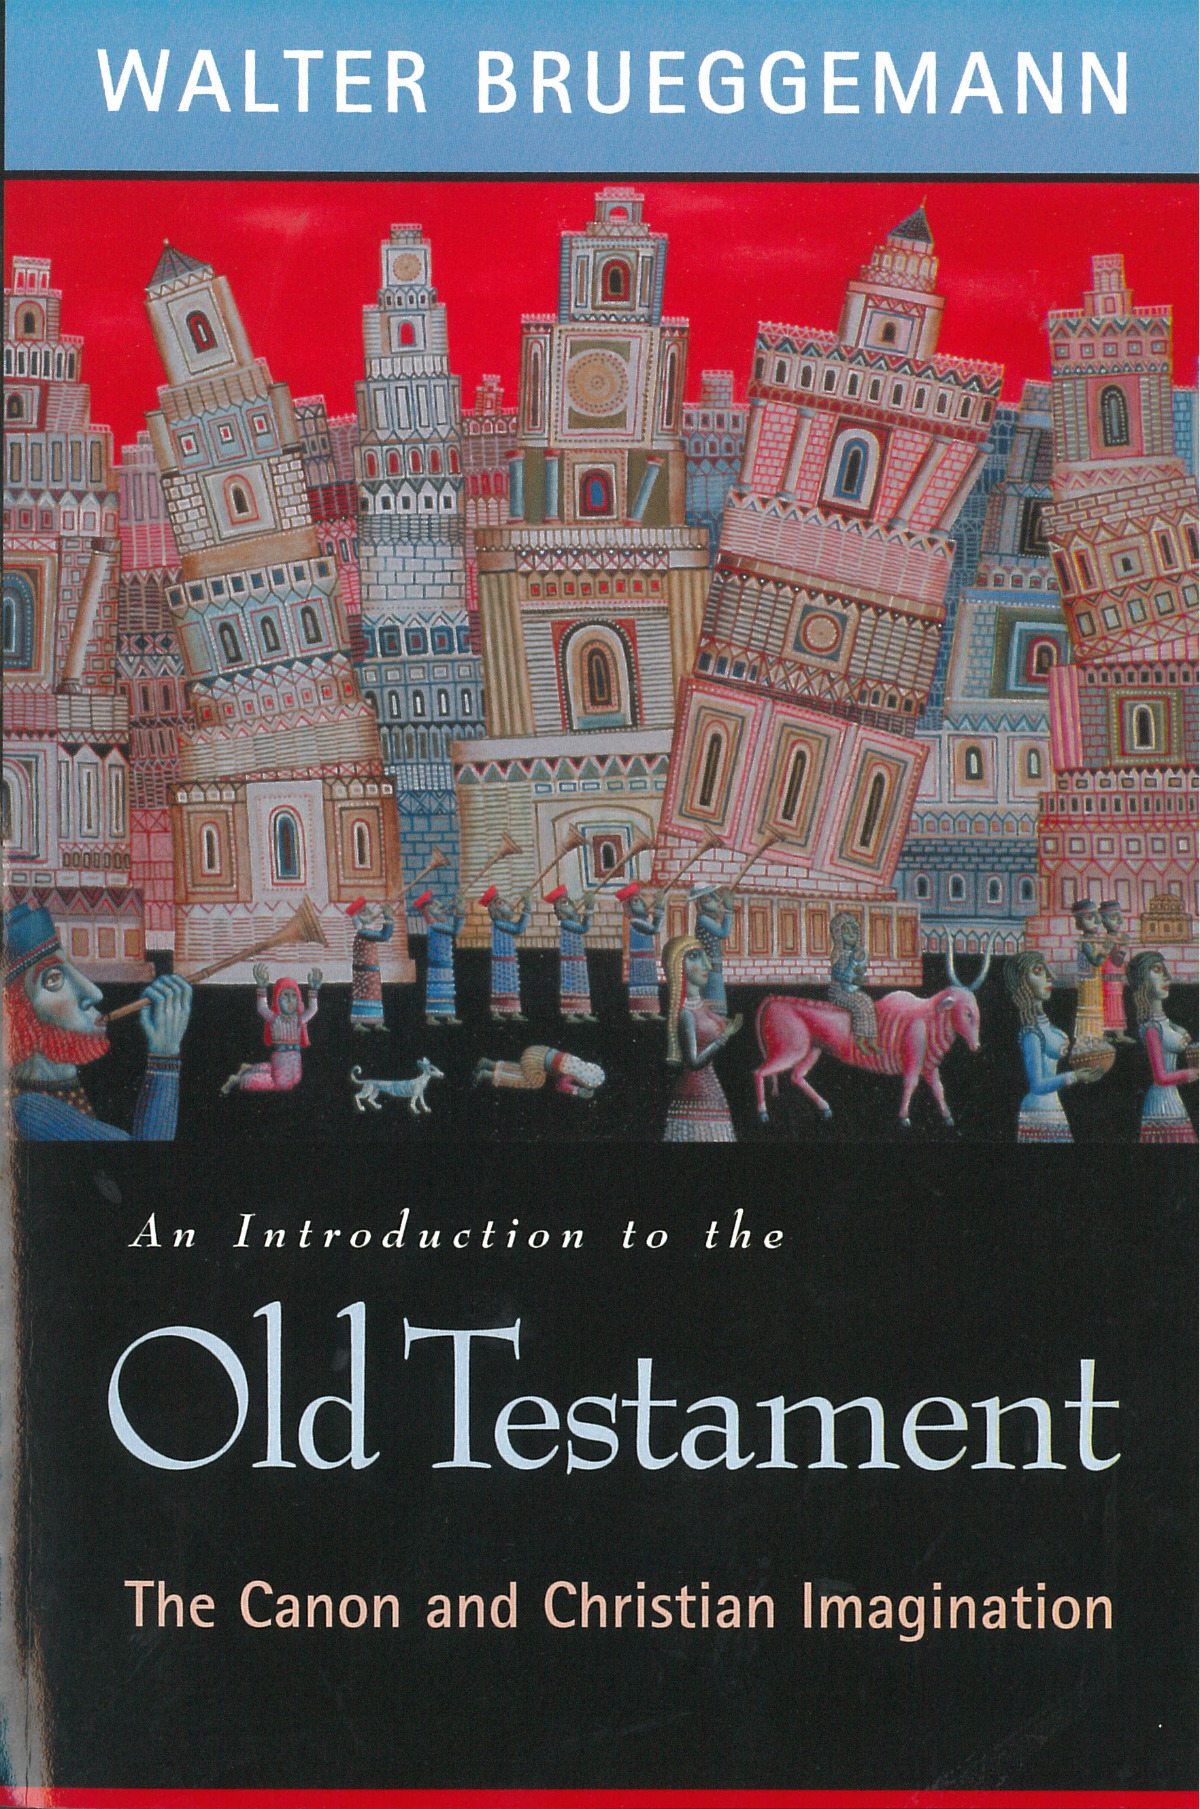 Finished #reading An Introduction to the Old Testament: The Canon and Christian Imagination, by Walter Brueggemann.
This is an excellent overview of the Old Testament from a “canonical criticism” perspective: a perspective that, while broadly...